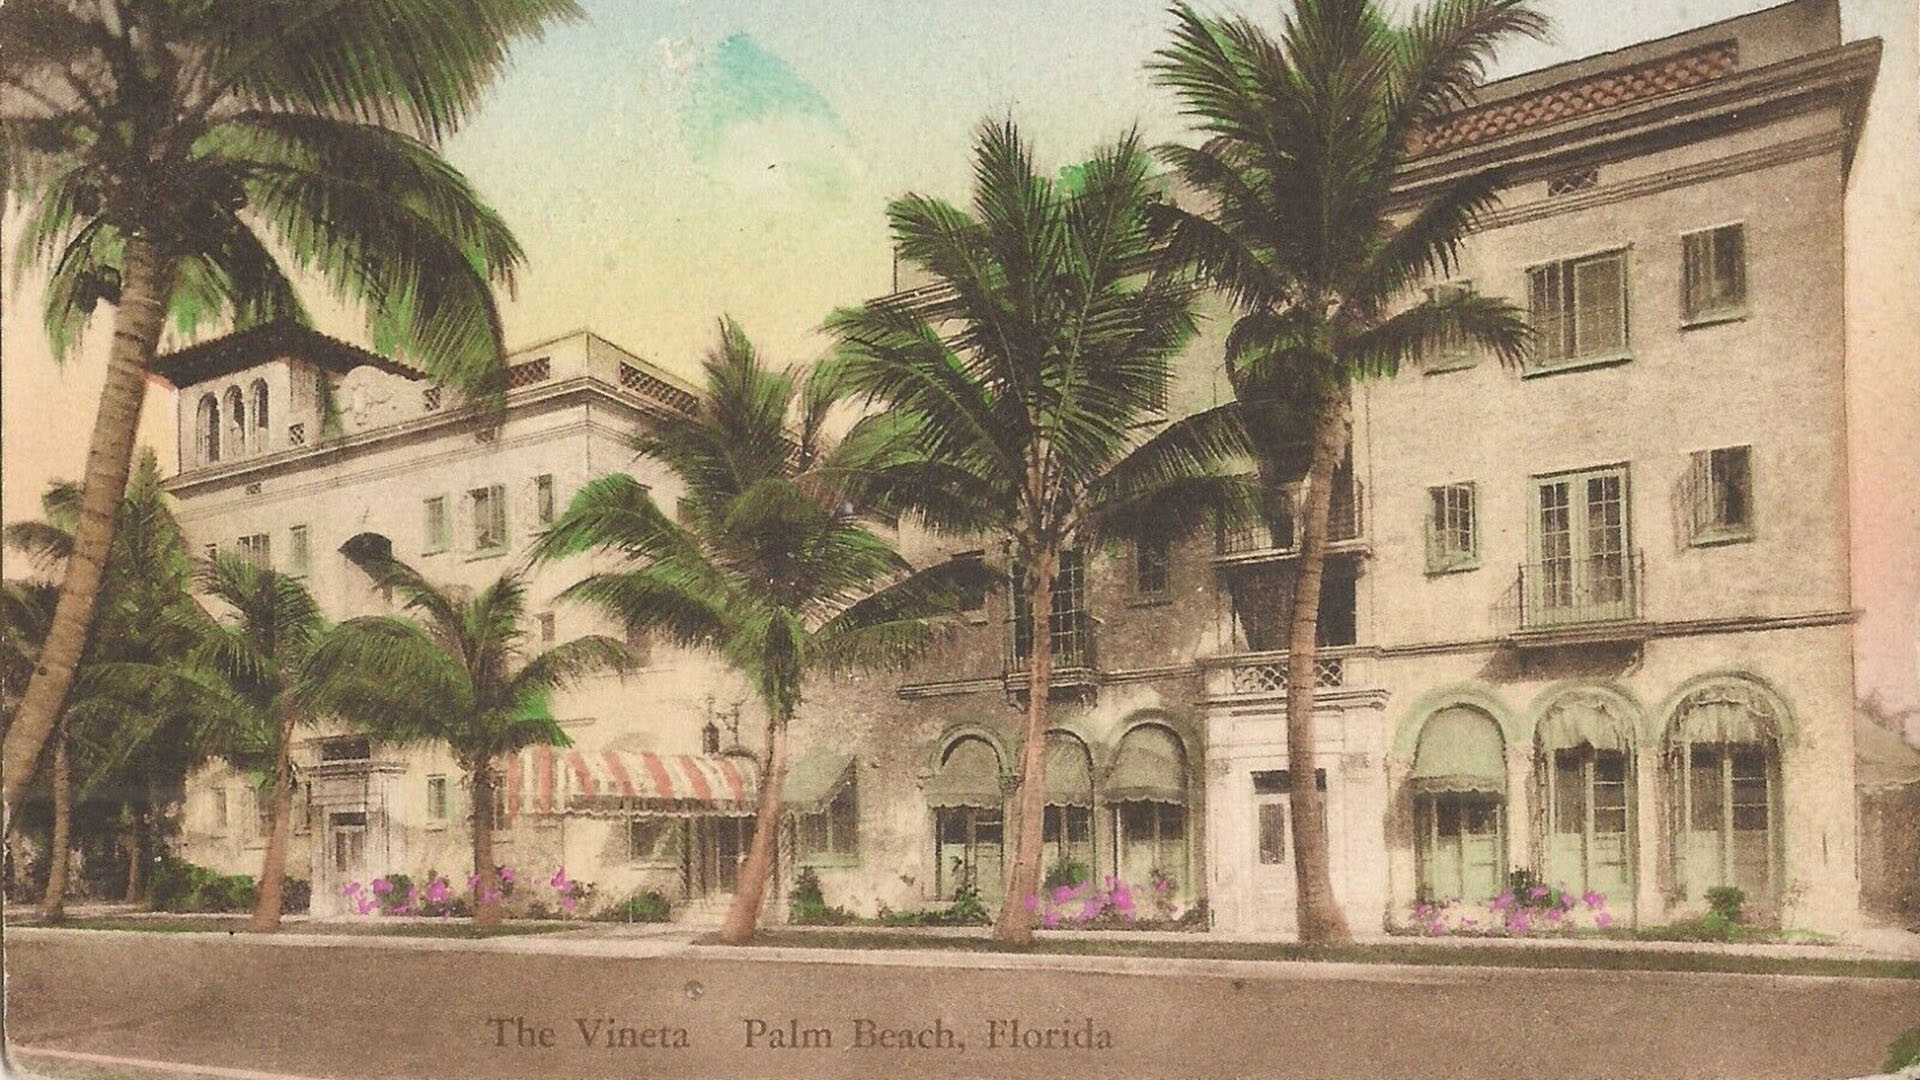 Oetker Collection’s The Vineta Hotel Palm Beach to open in 2023